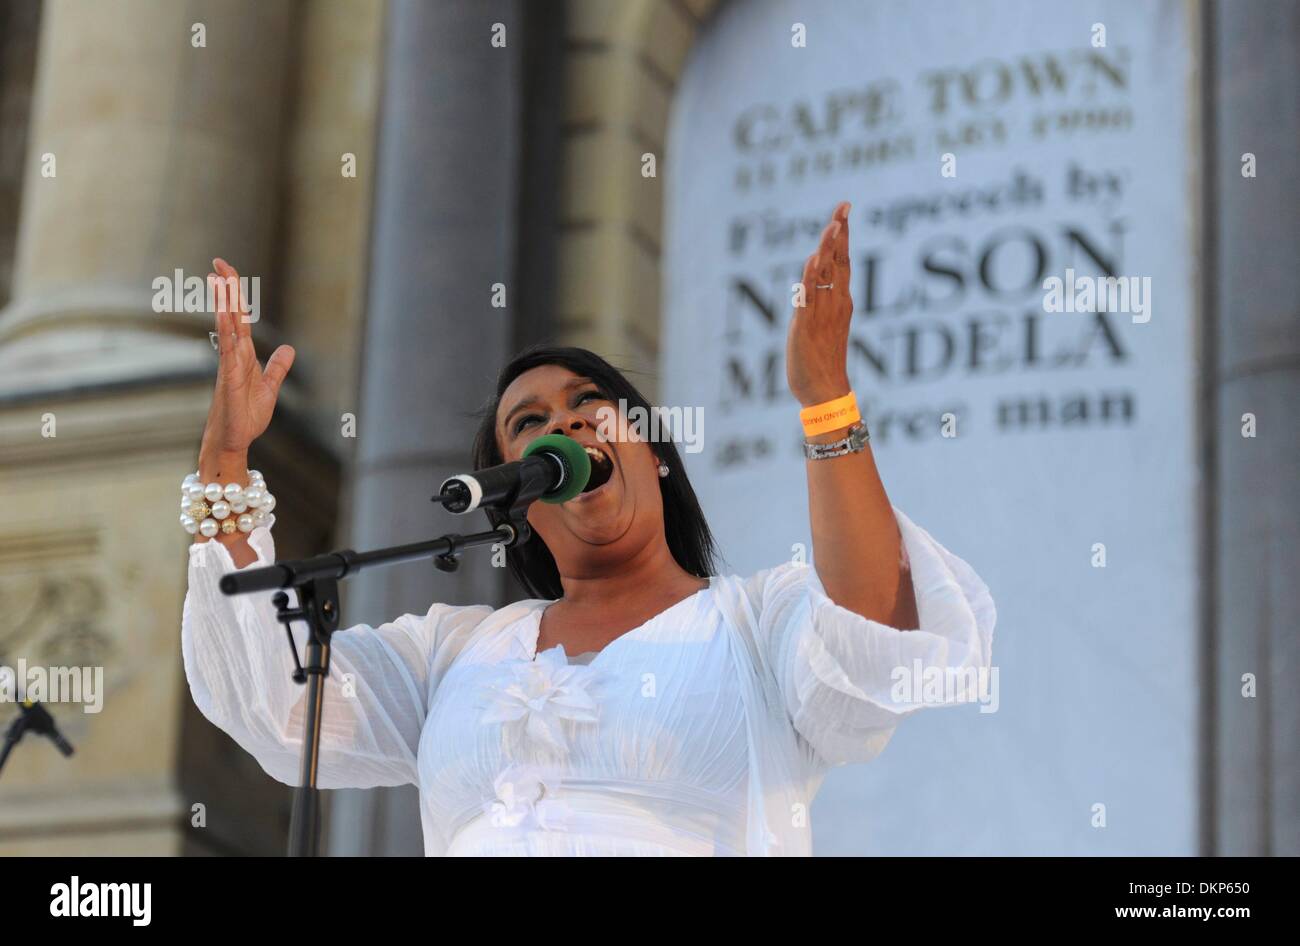 Cape Town, South Africa. 8th Dec, 2013. Vicky Sampson at a prayer service for Former President, Nelson Mandela on December 8, 2013 in Cape Town, South Africa. World icon, Nelson Mandela passed away quietly on the evening of December 5, 2013 at his home in Houghton with family. Around the world, people have gathered, mourning the loss of Tata Madiba. Credit: Leanne Stander/Foto24 /Gallo Images/Alamy Live News Stock Photo